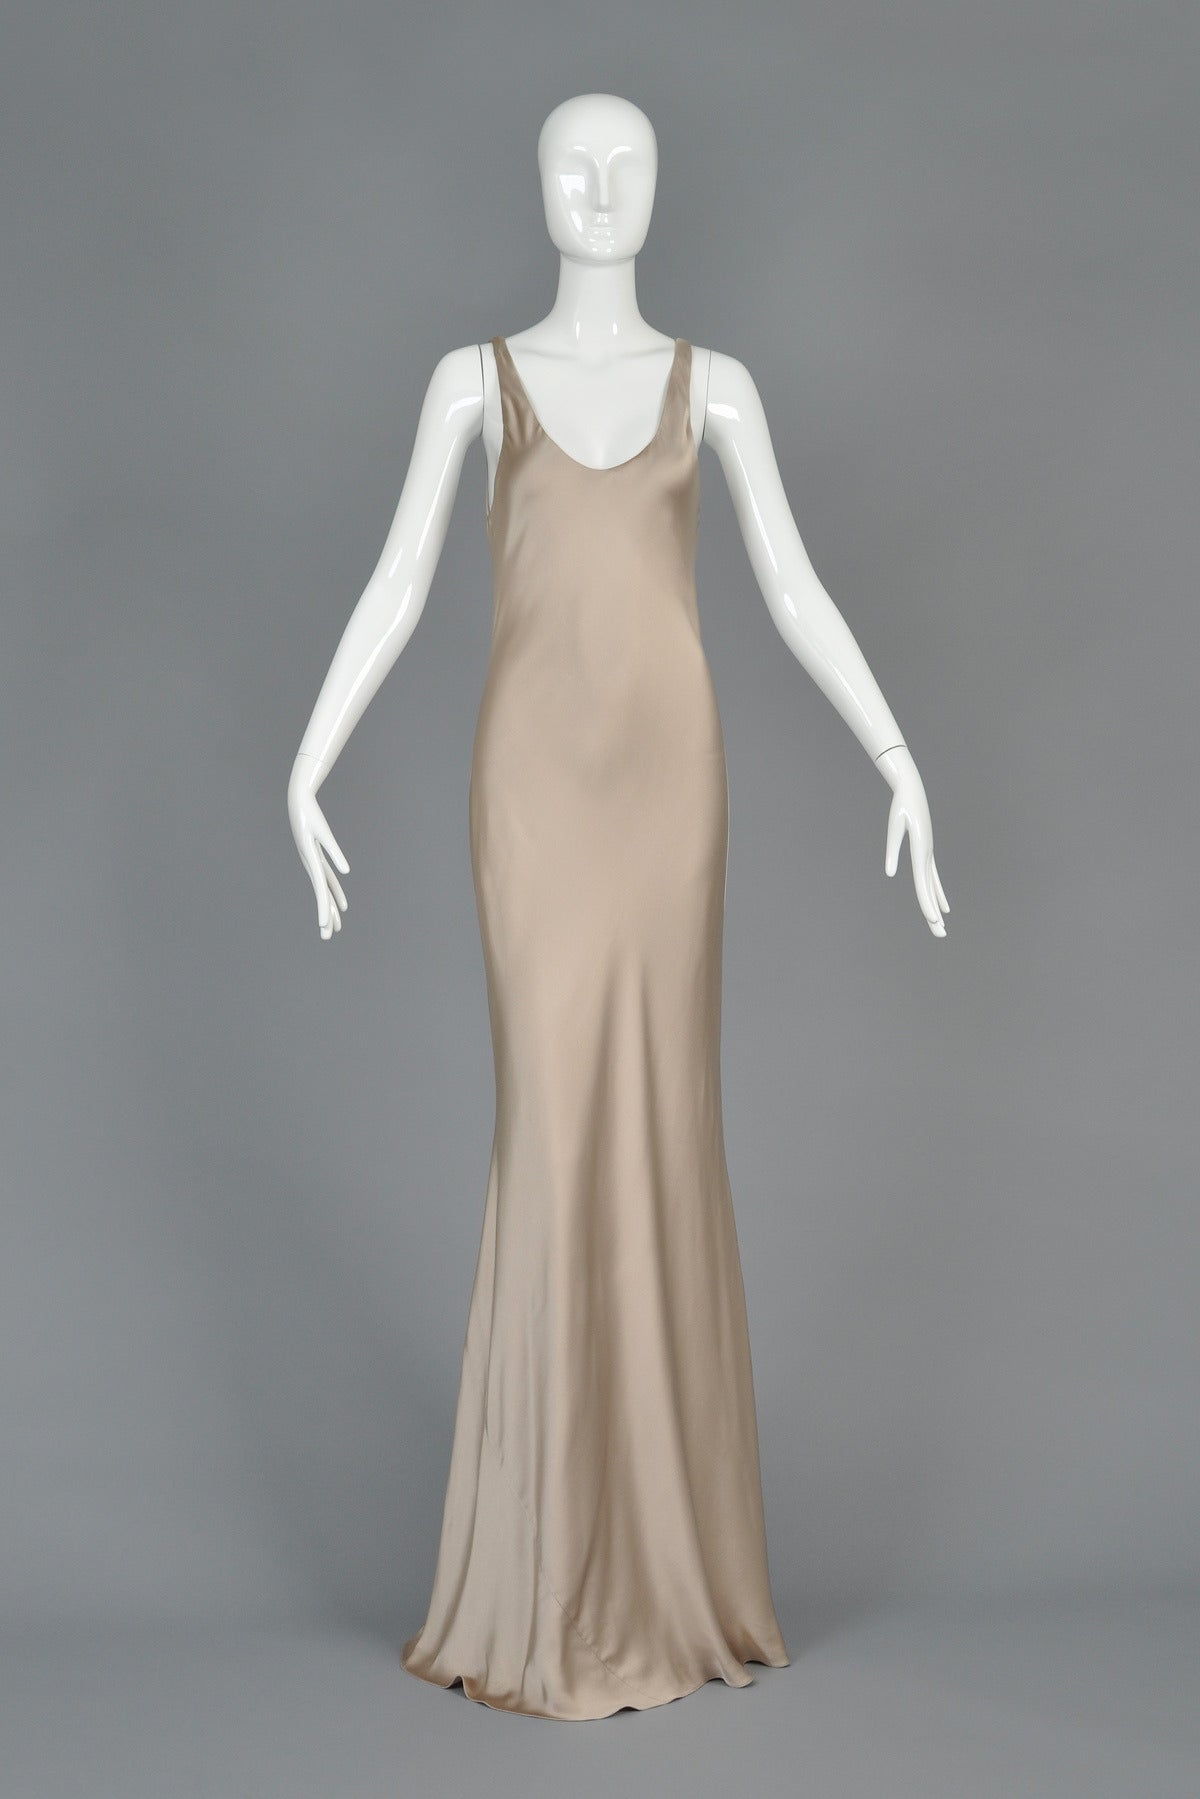 Truly stunning ca 2012 Ralph Lauren Collection Purple Label silk charmeuse evening gown in pale golden beige. Simple and chic to the extreme! Scoop neck in front and back with bias-cut slip body and flared skirt. Supermodel length — our 5’9” model